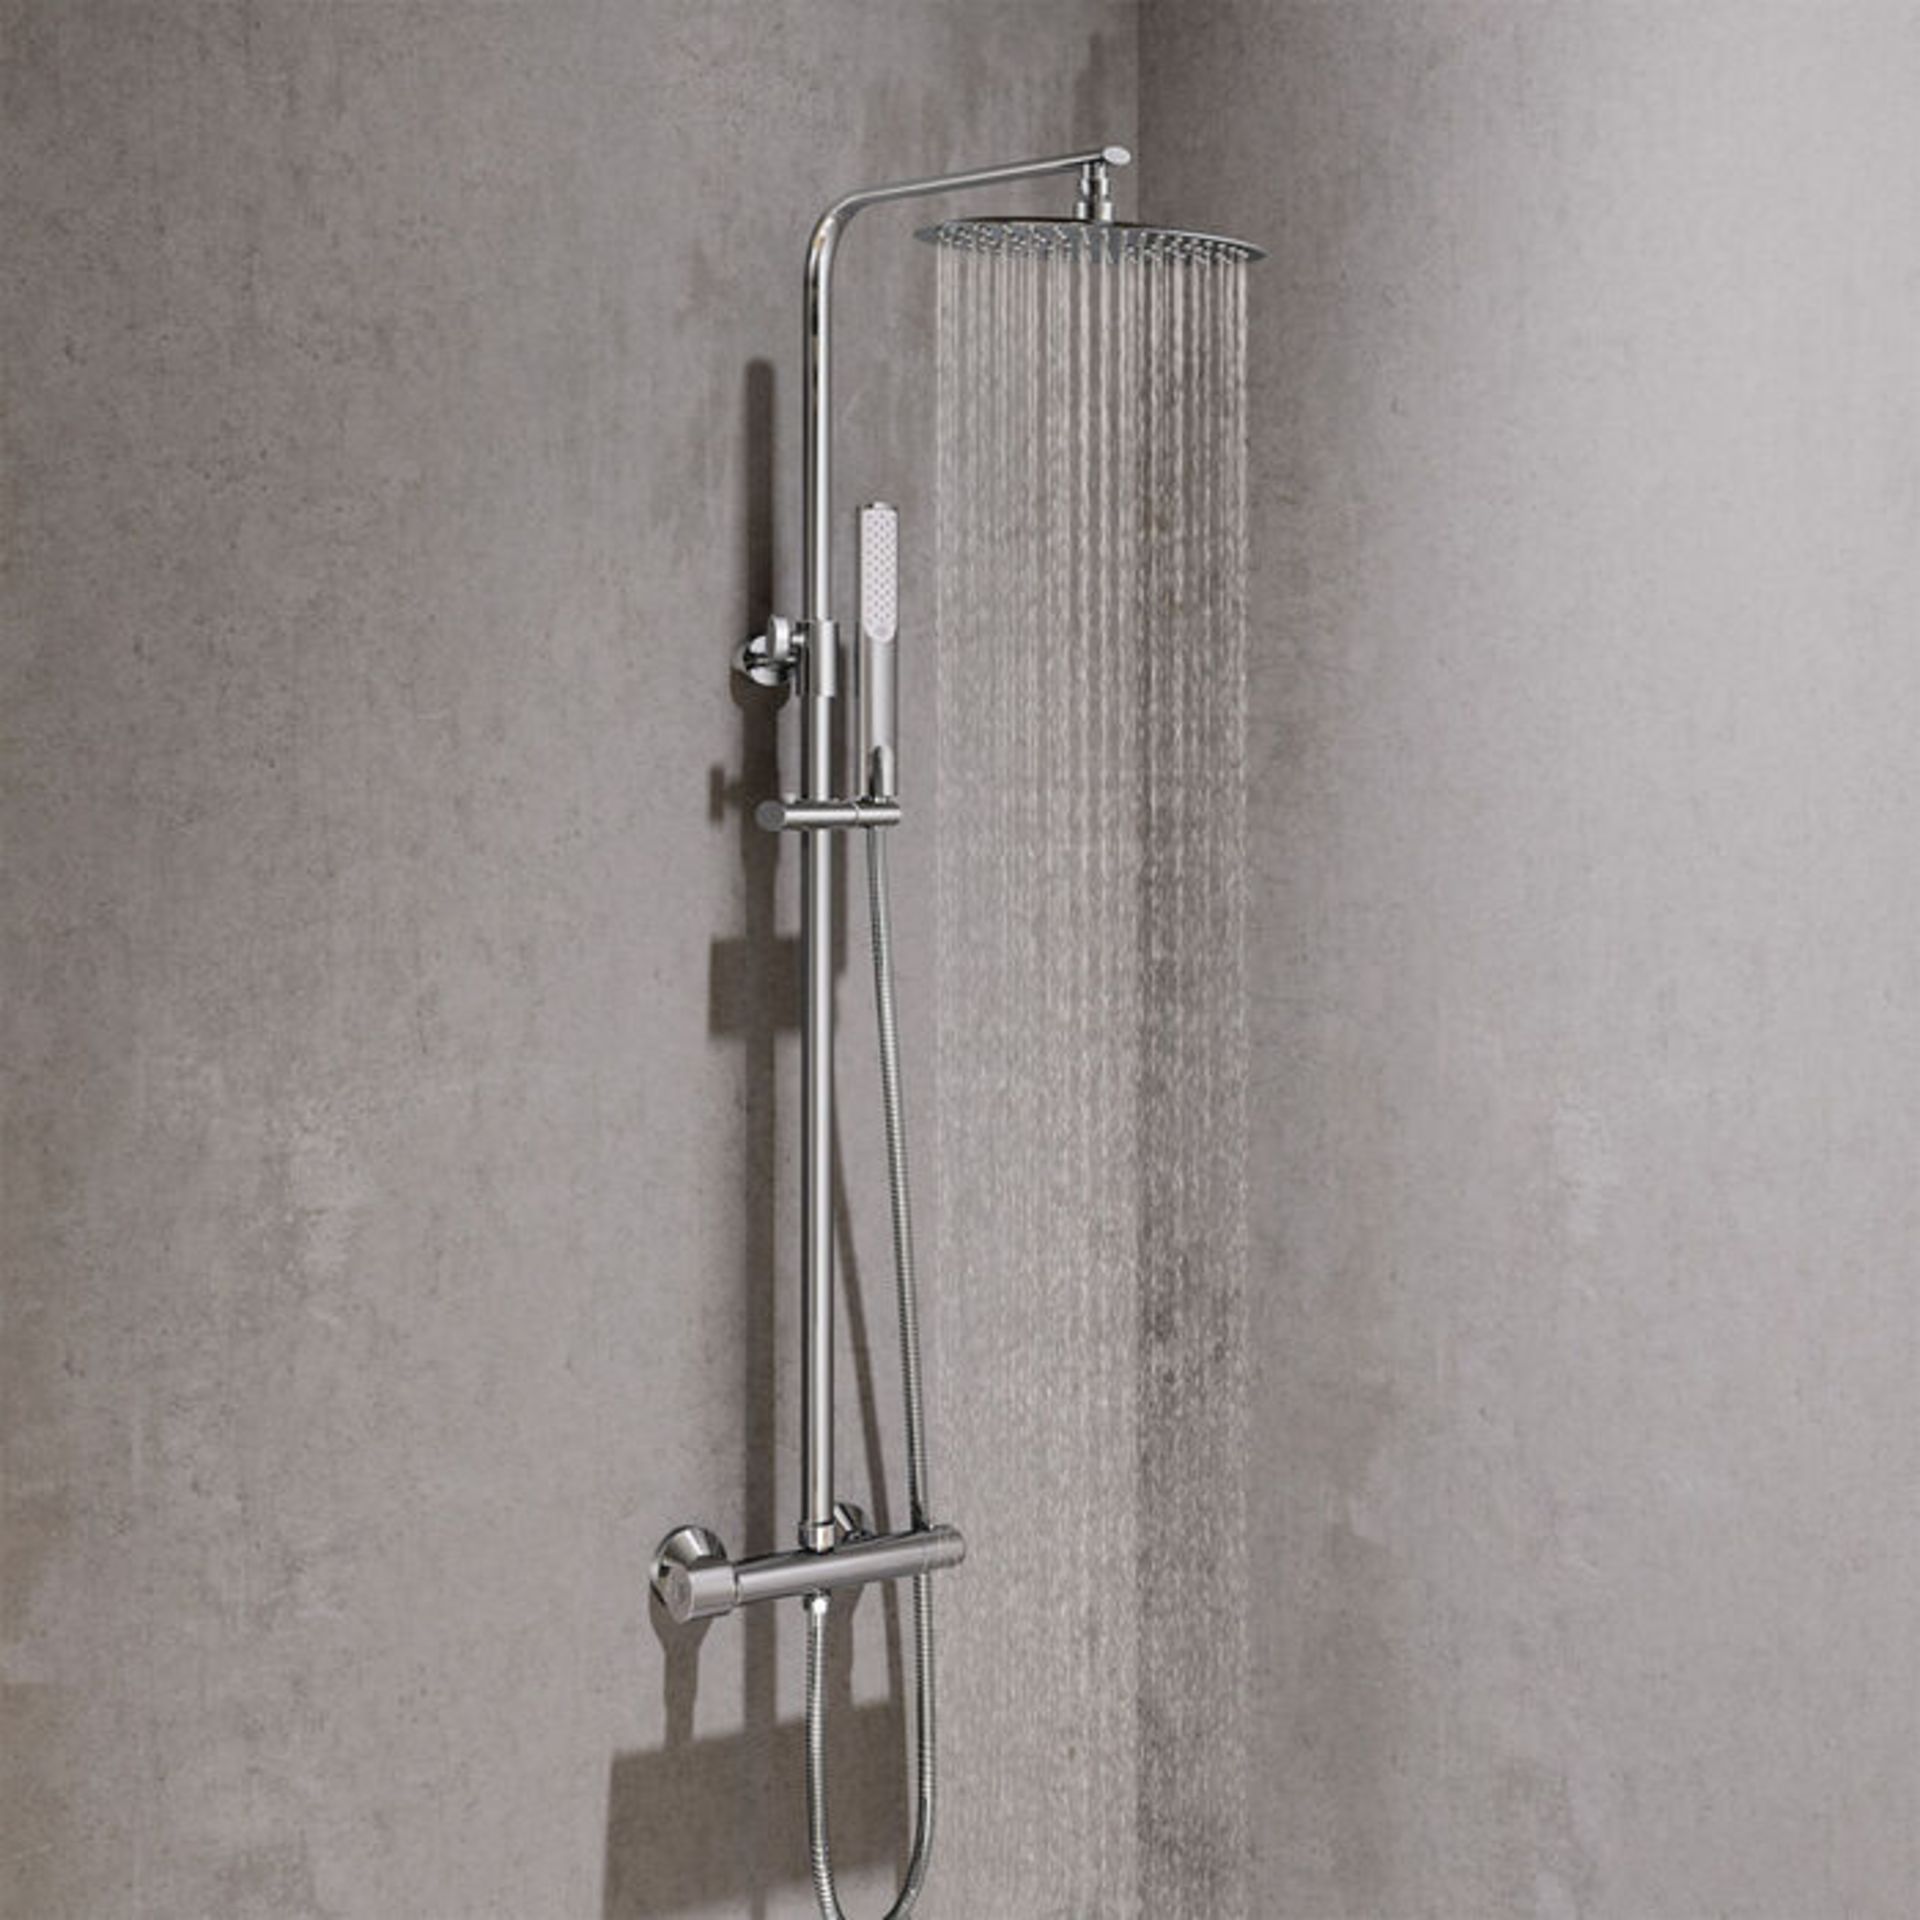 (AA122) Oval Thermostatic Mixer Shower Kit & Large Head. RRP £349.99. Style meets function wit...(